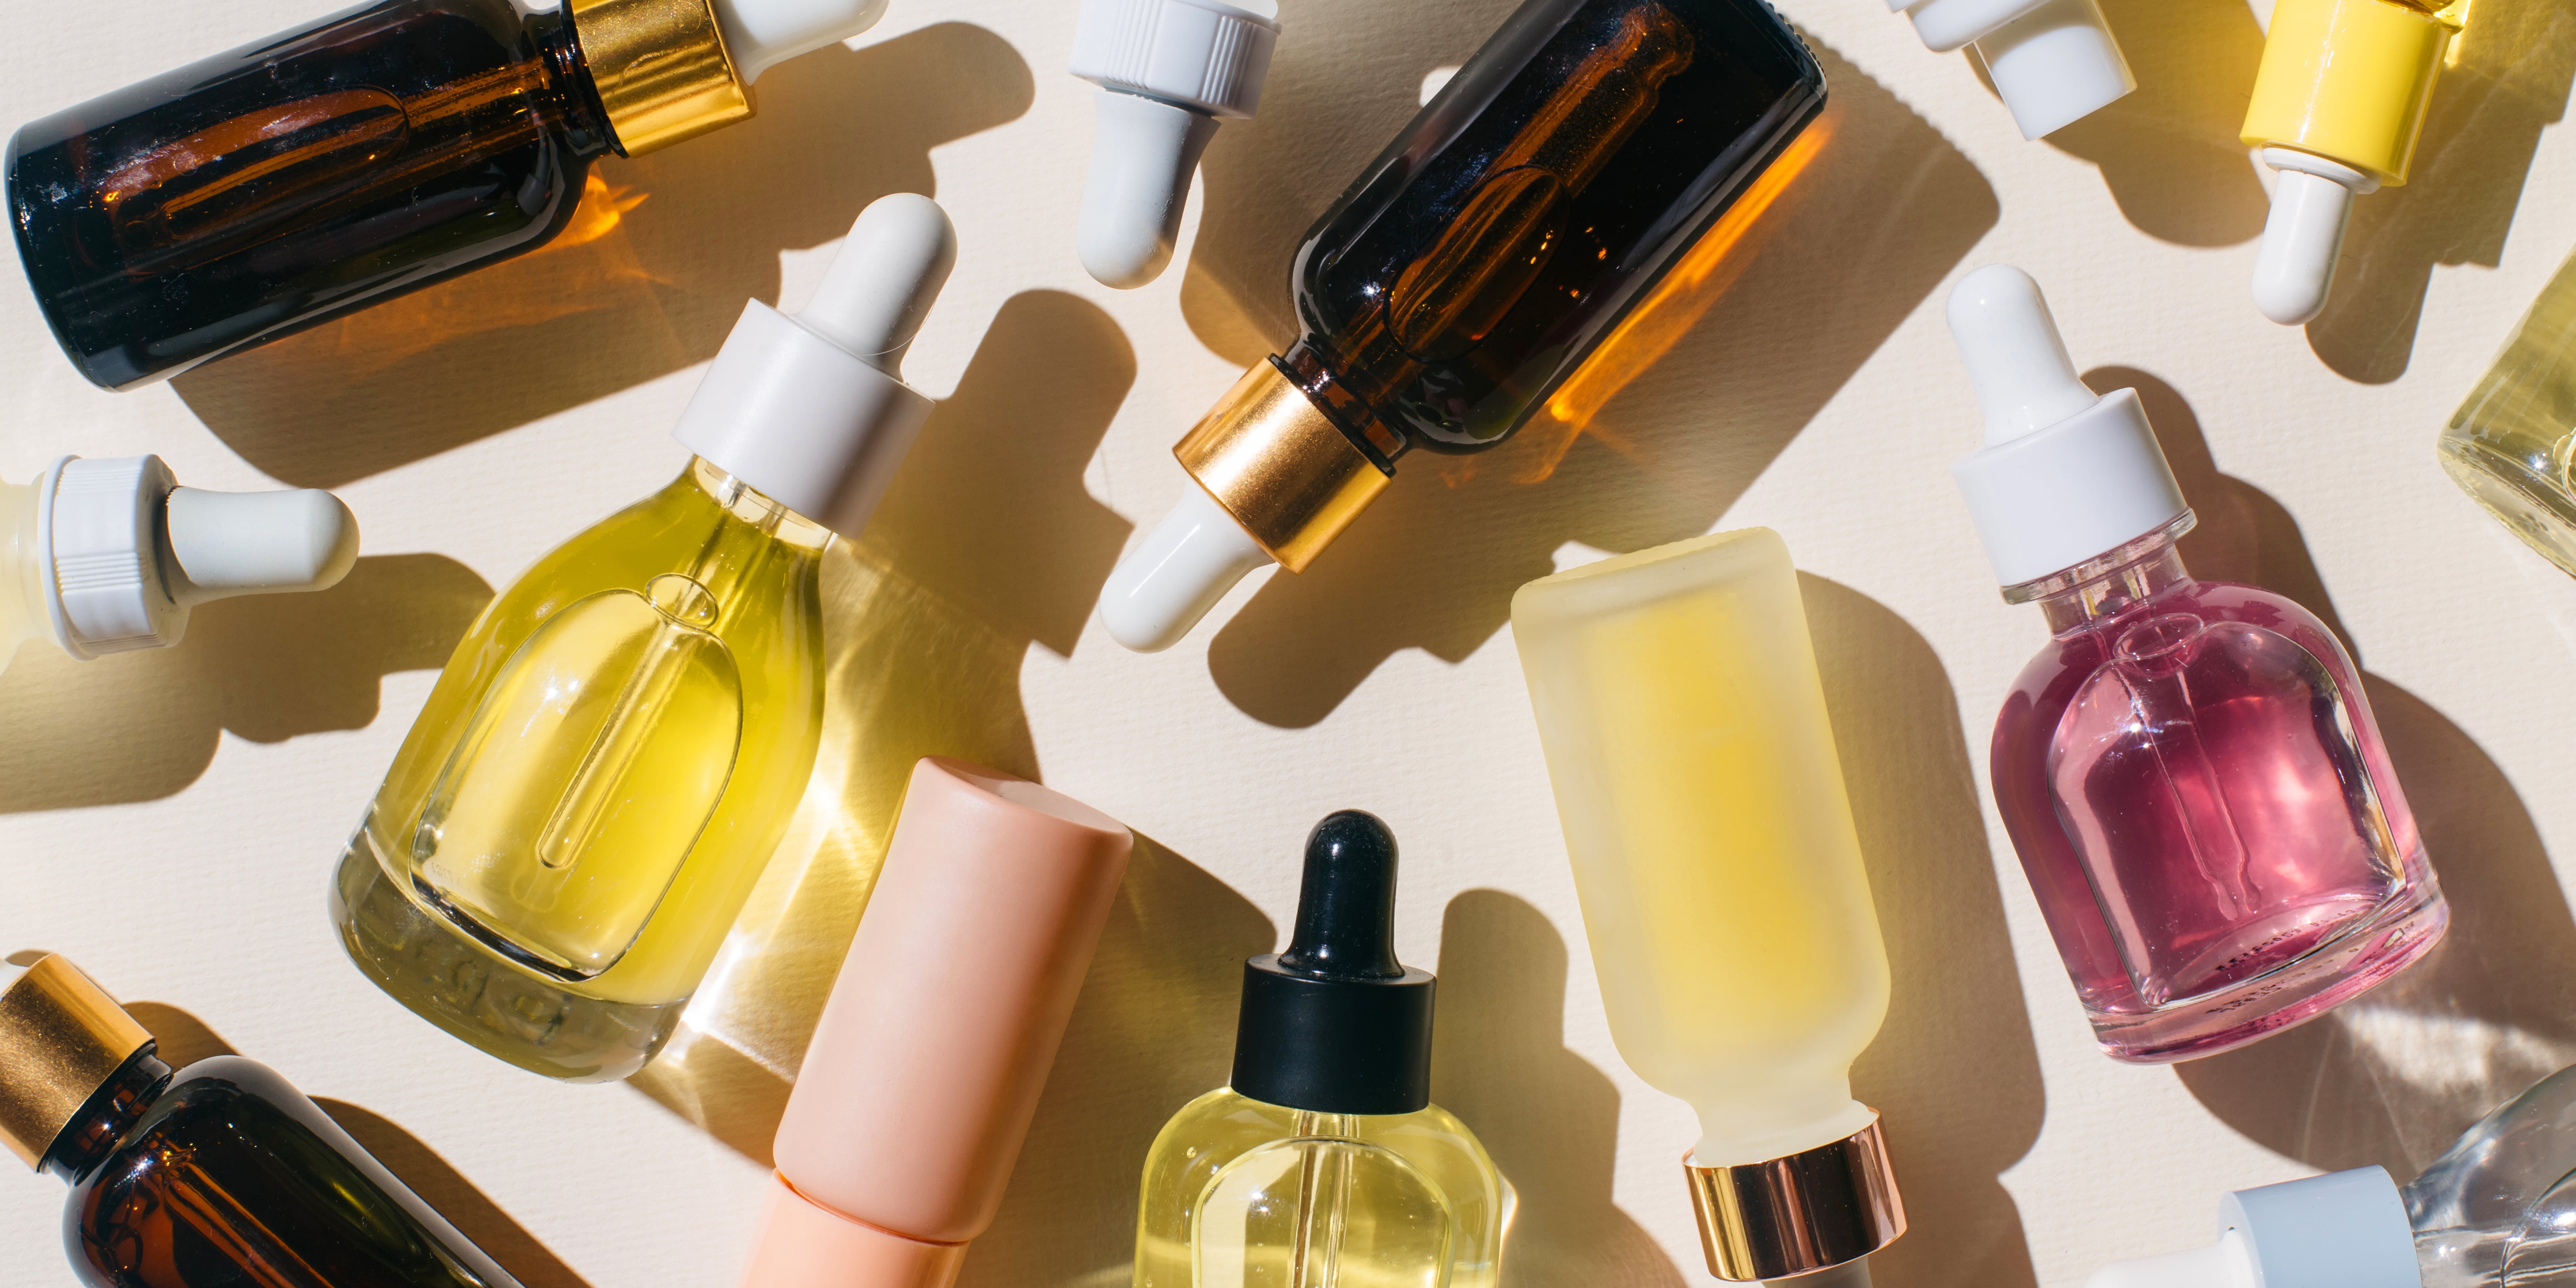 Beauty Products Packaging Don't Always Get Recycled — Report